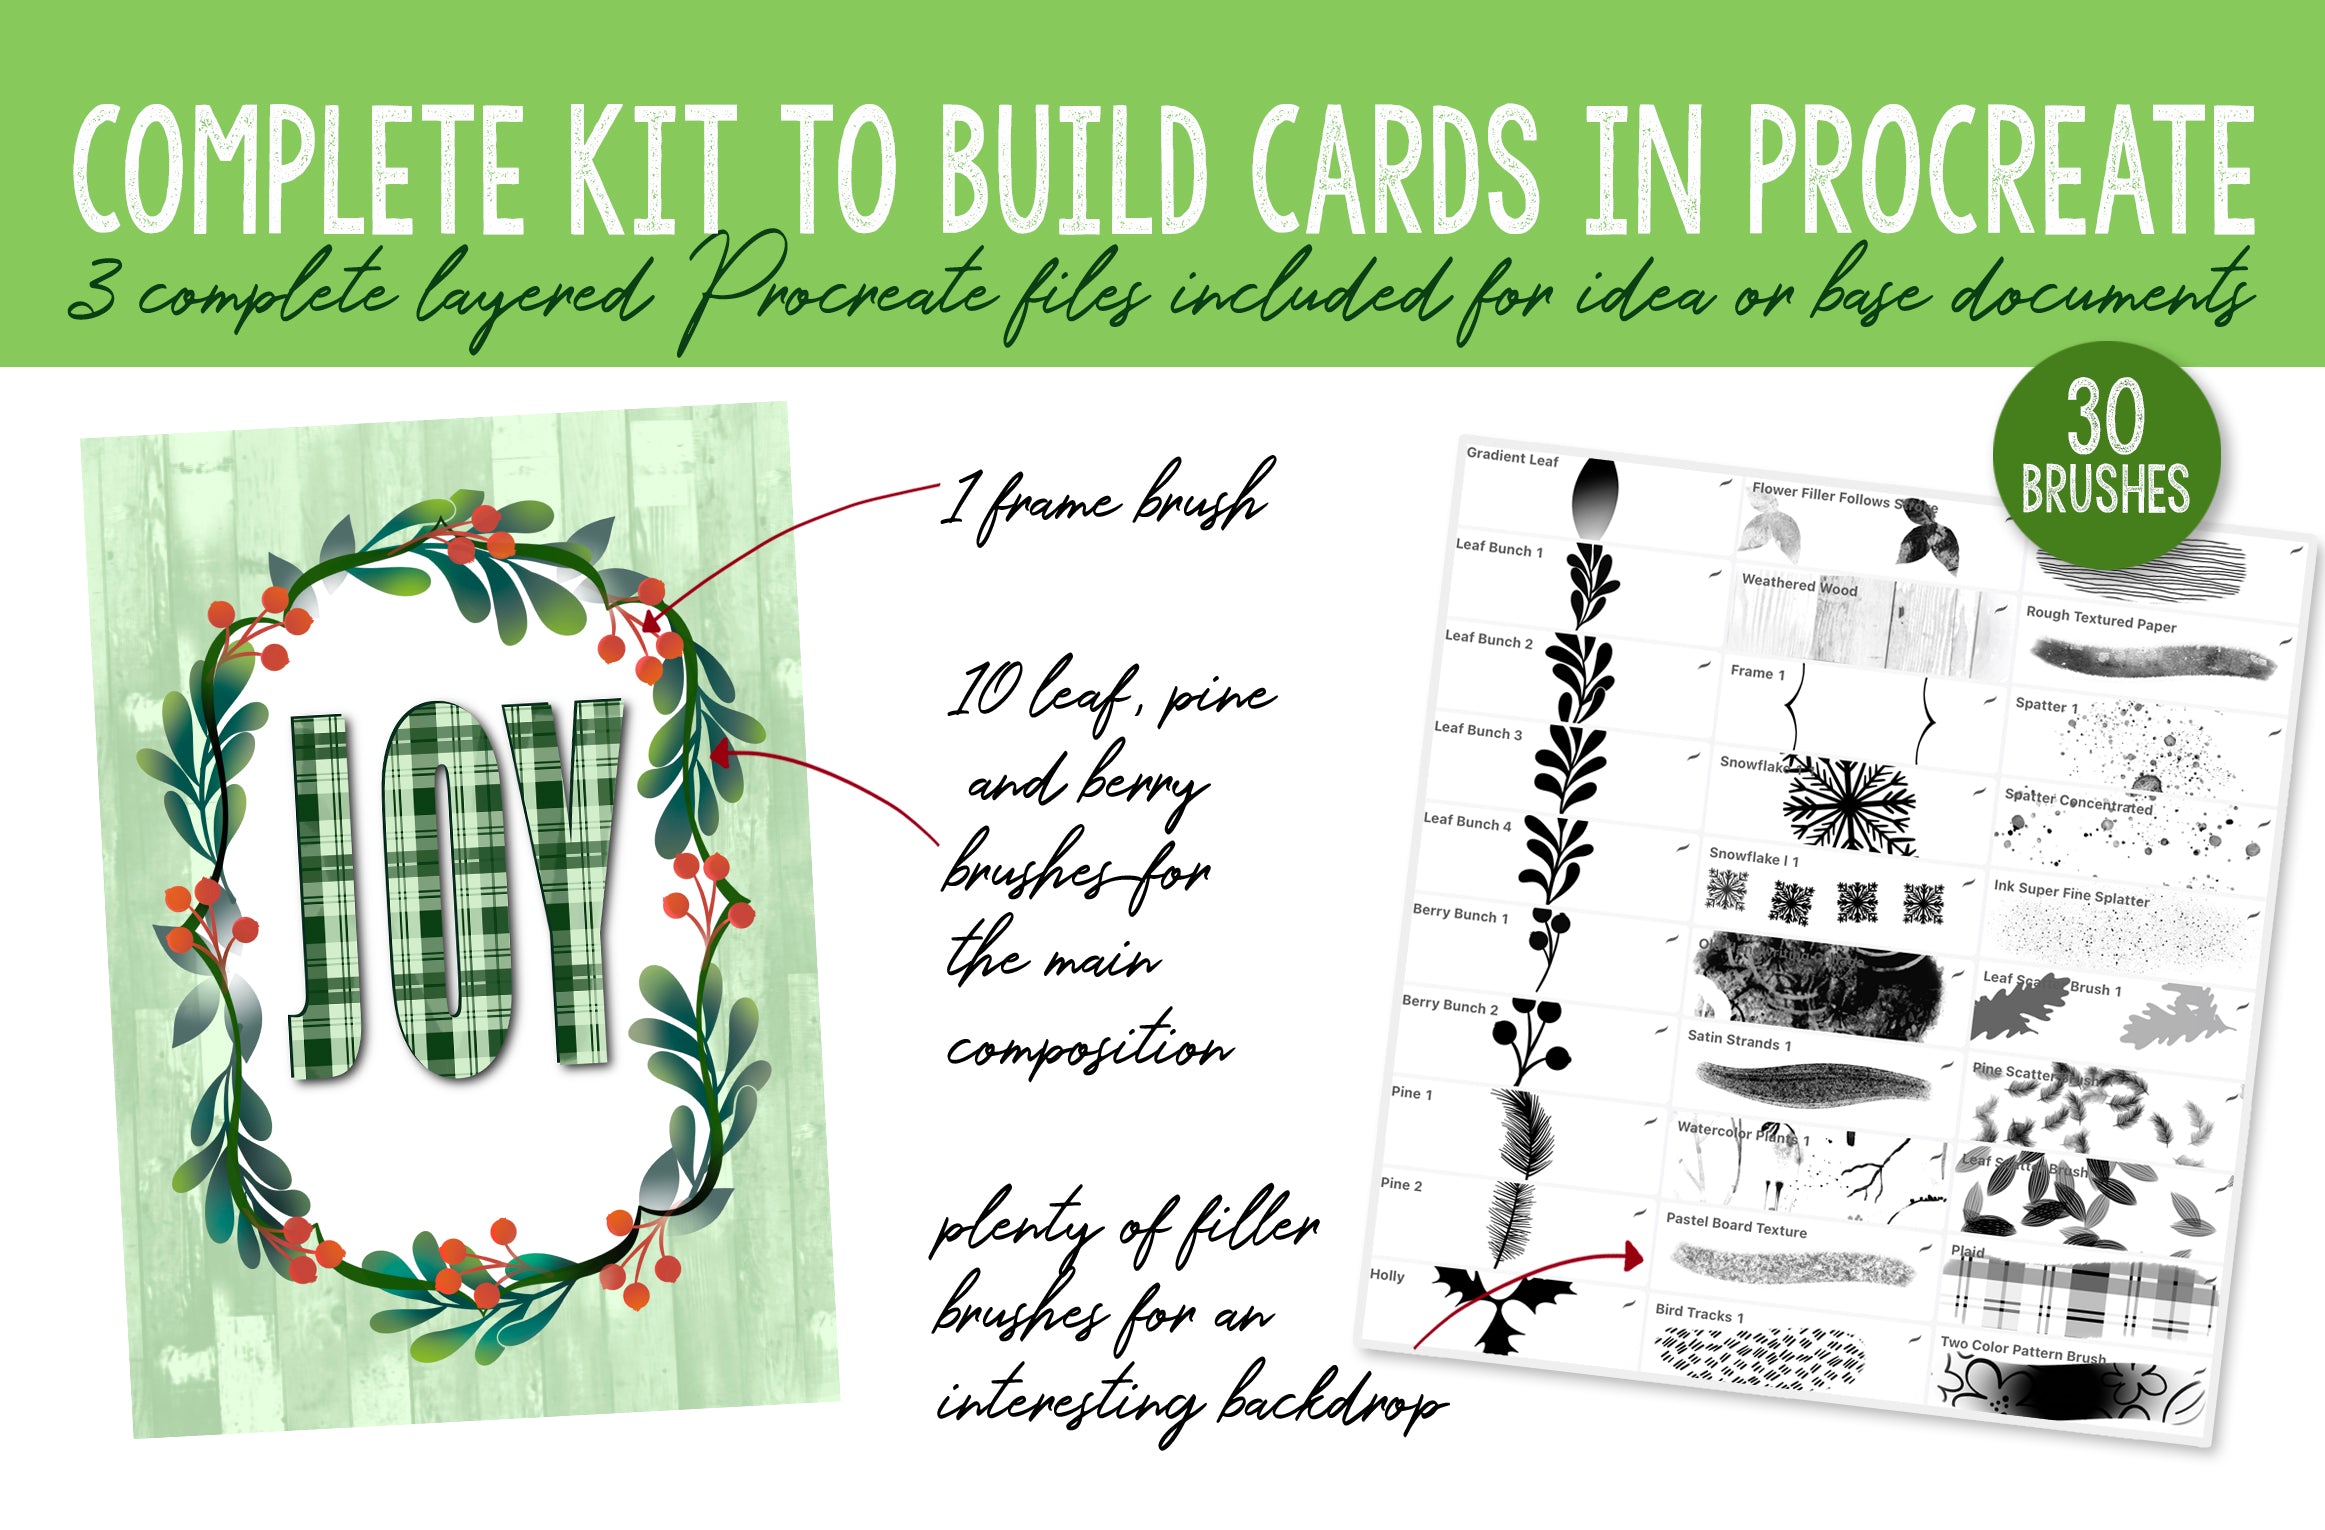 Volume 085 - Build a Card Procreate Brush and Assets